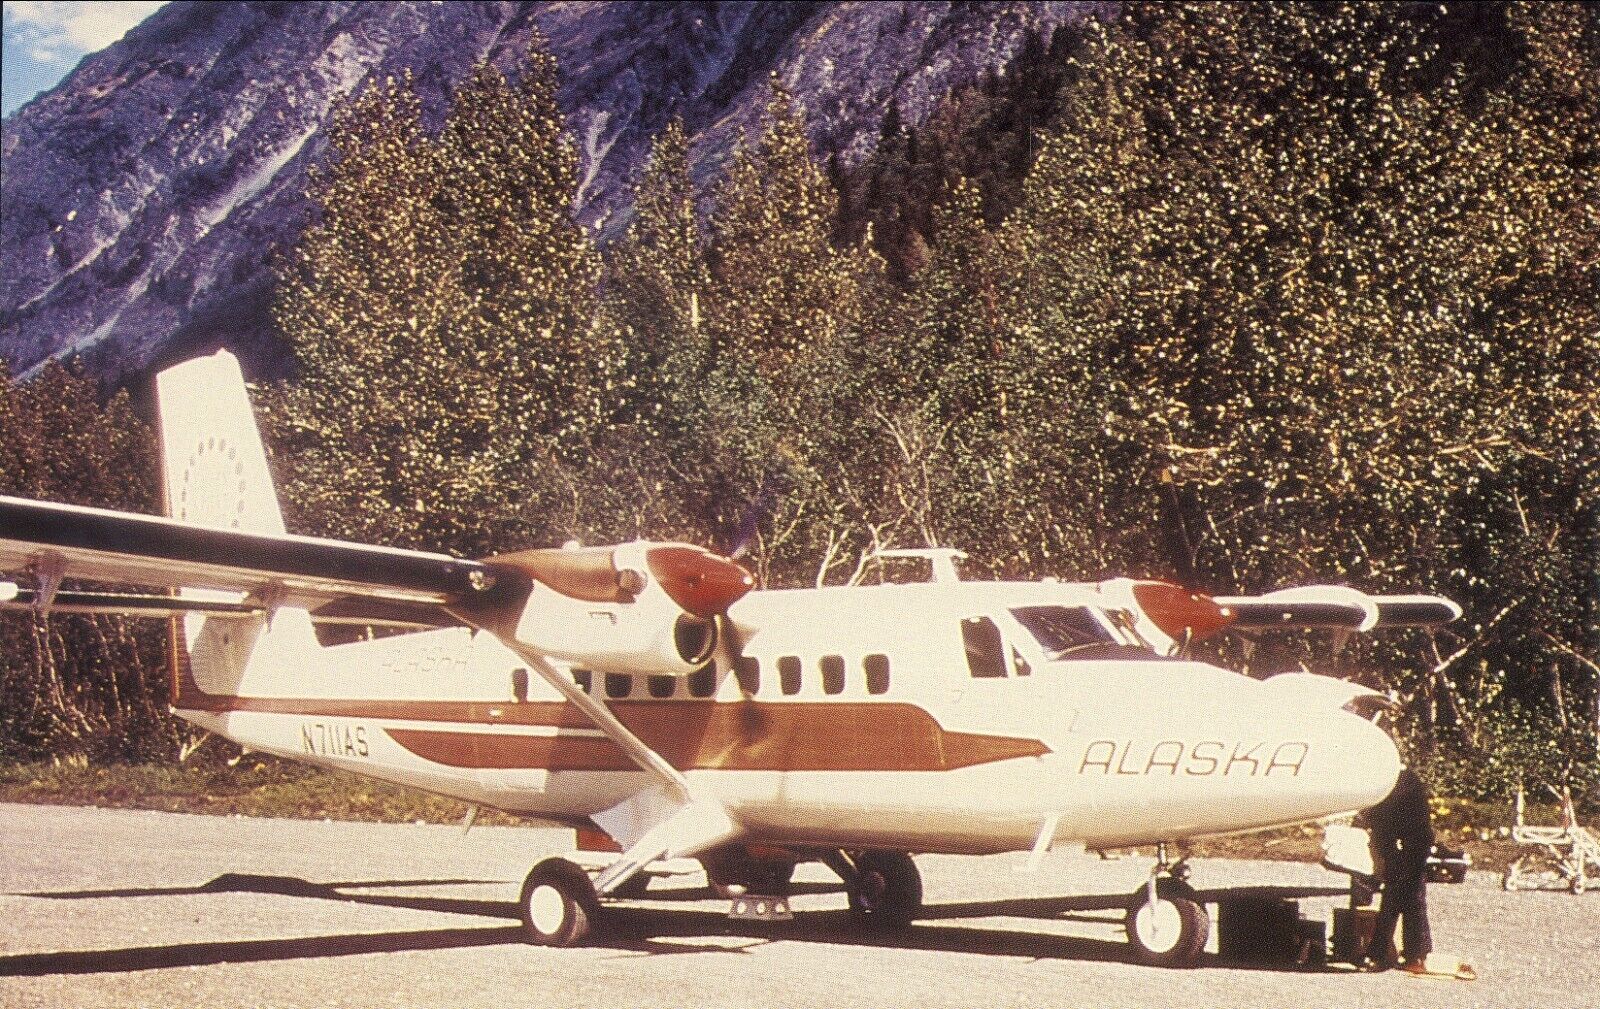 ALASKA   AIRLINES  DHC-6  TWIN OTTER  AIRPORT / AIRPLANE  / AIRCRAFT   238